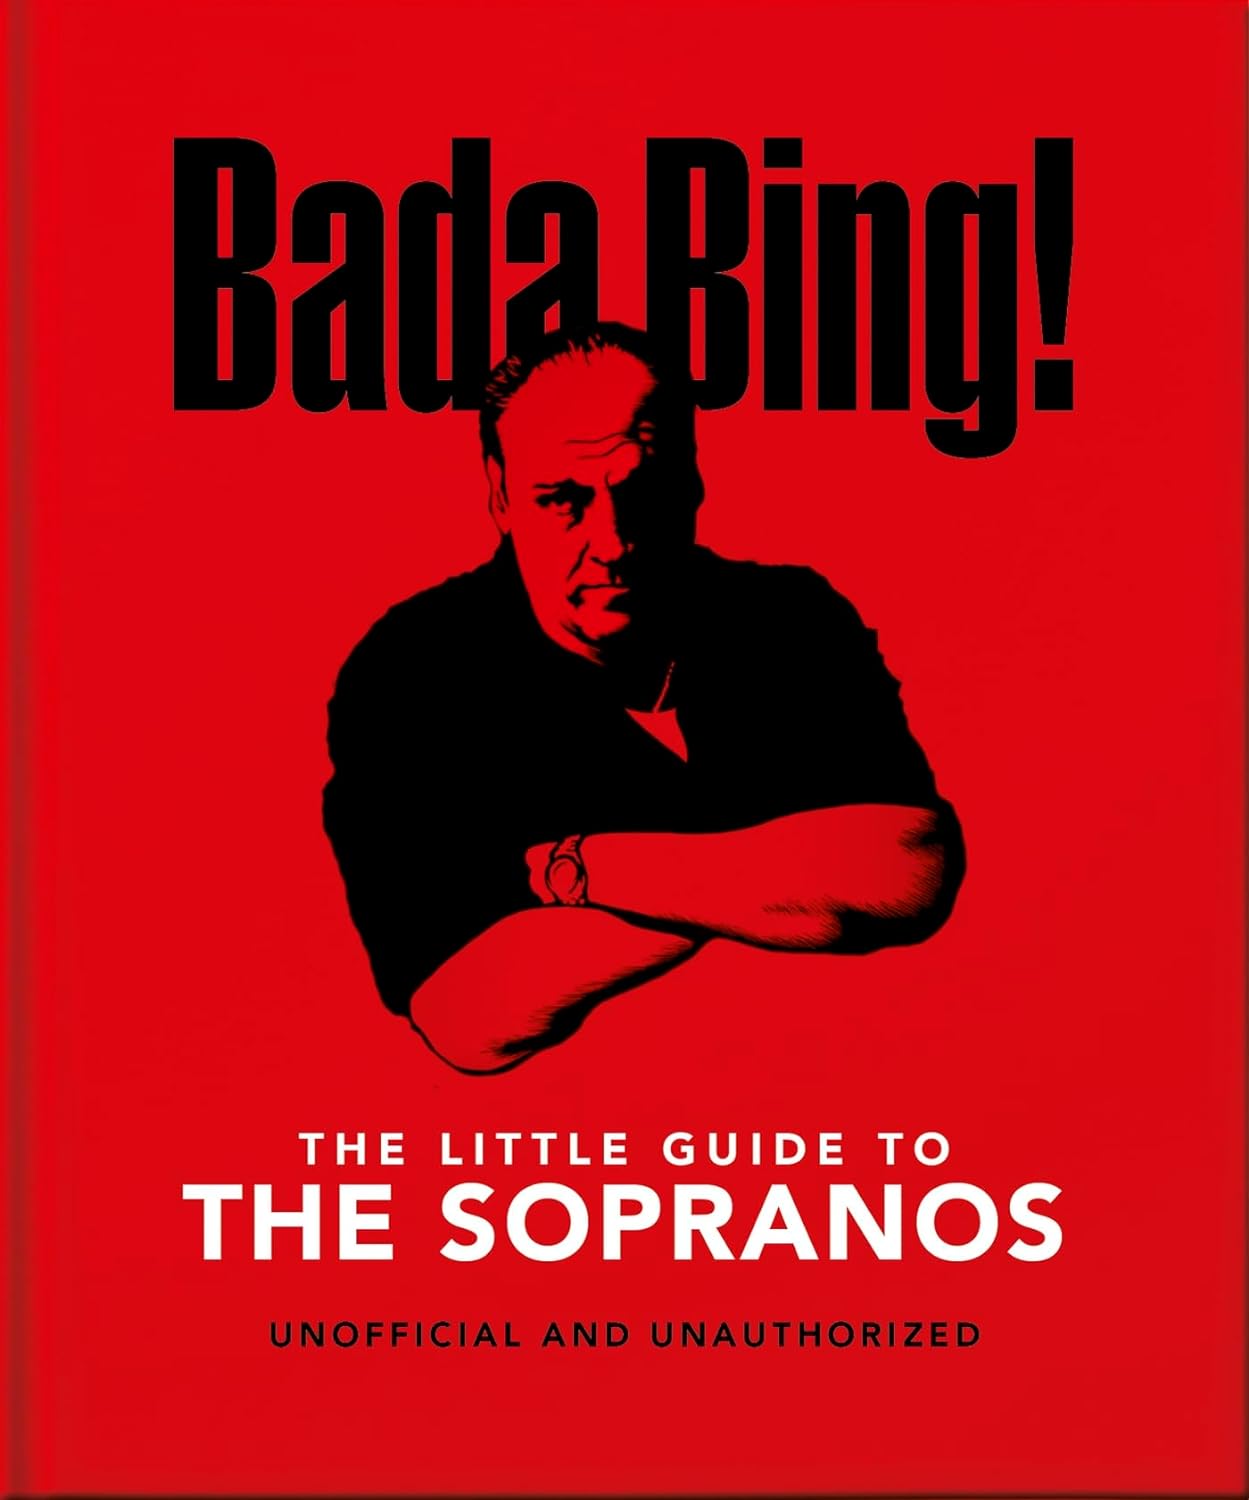 Little Guide To The Sopranos Book